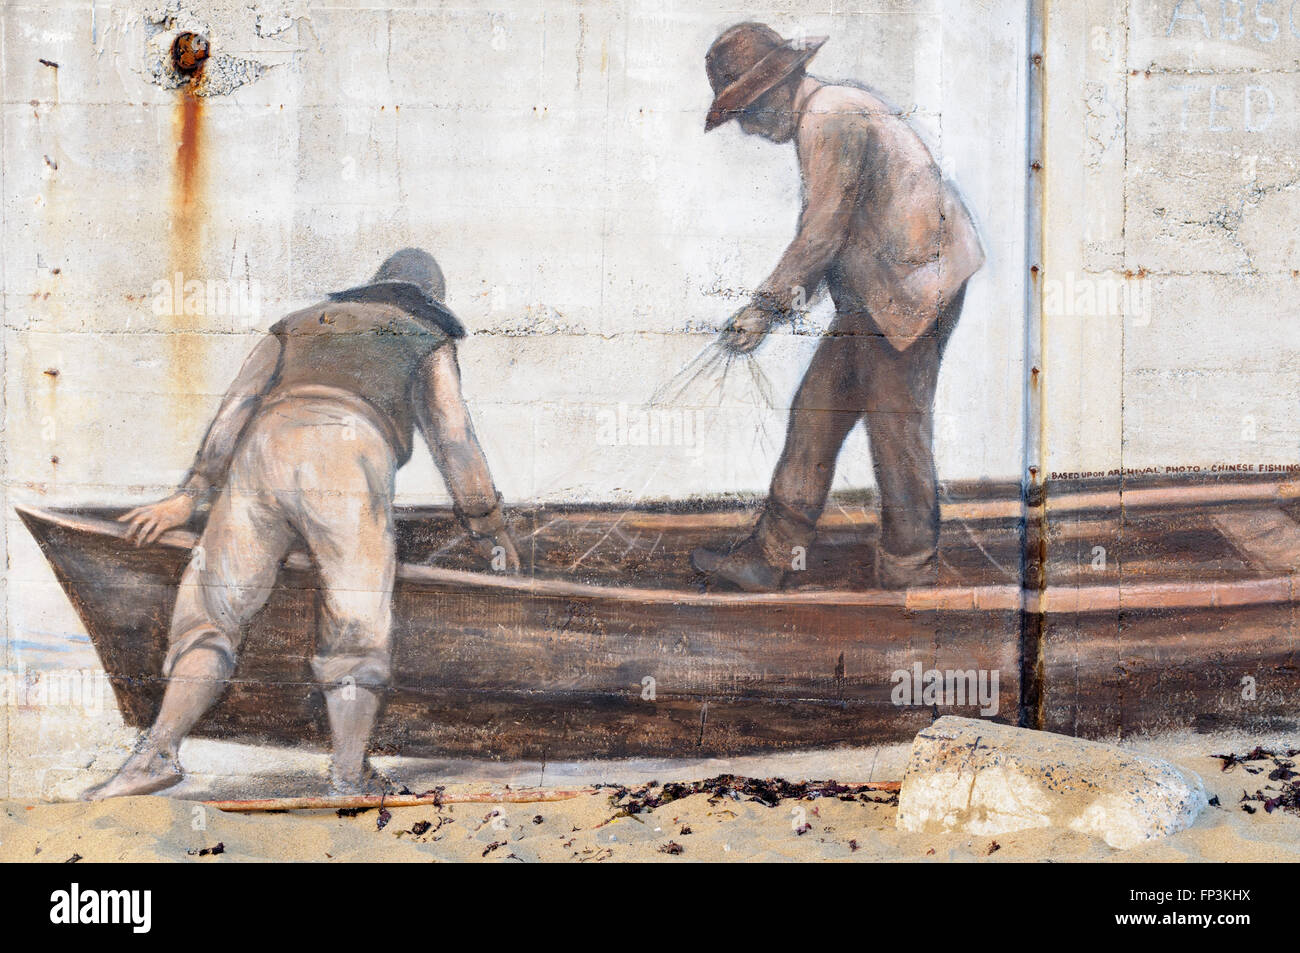 Mural of two fishermen in their boat, Cannery Row area, Monterey, California, USA Stock Photo